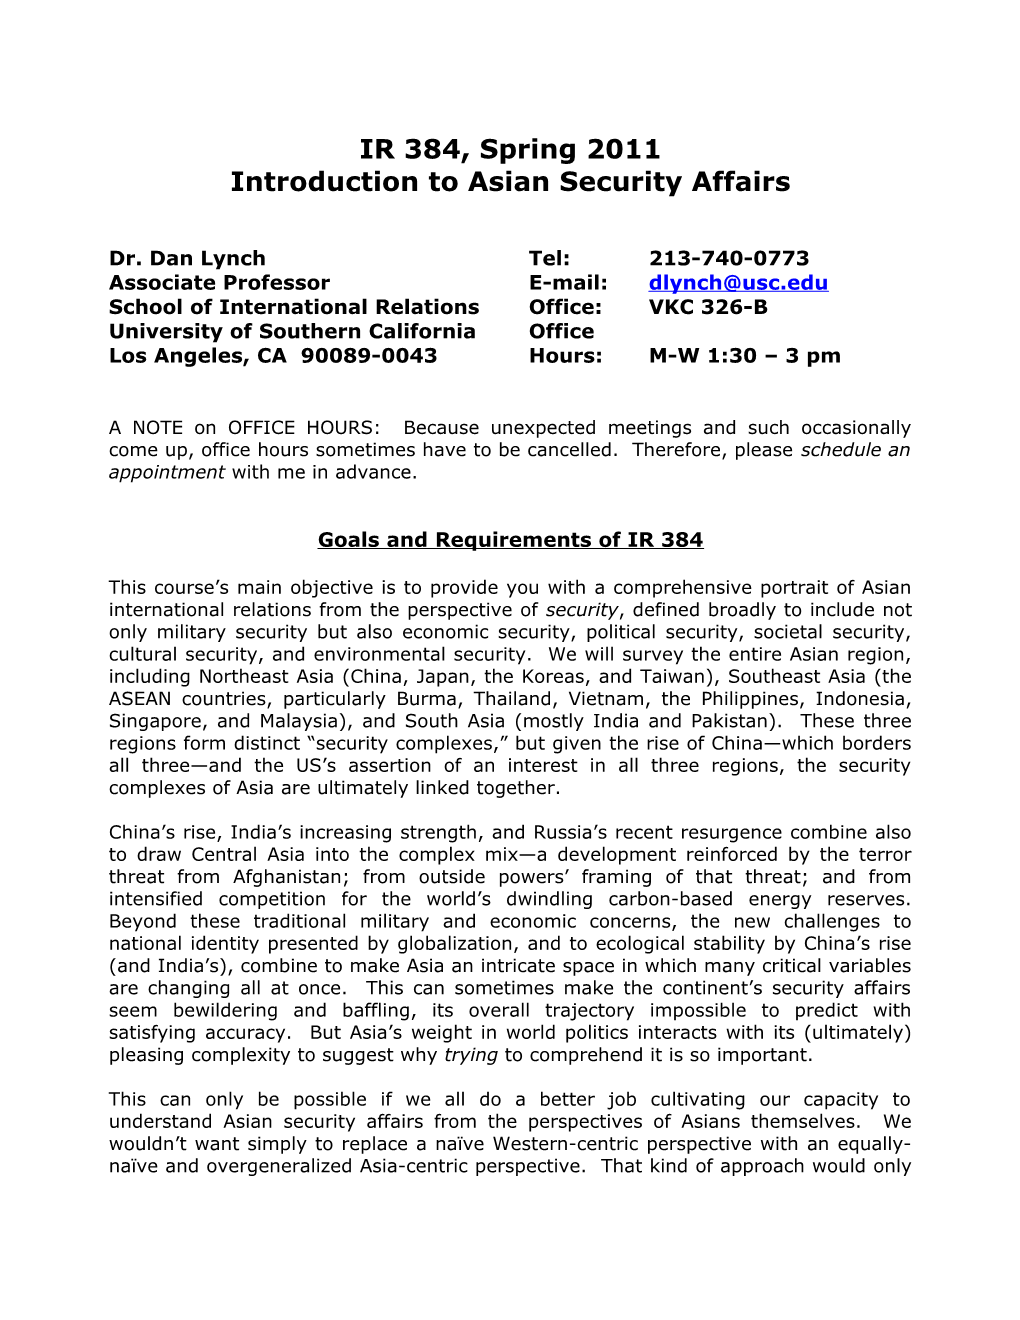 Introduction to Asian Security Affairs